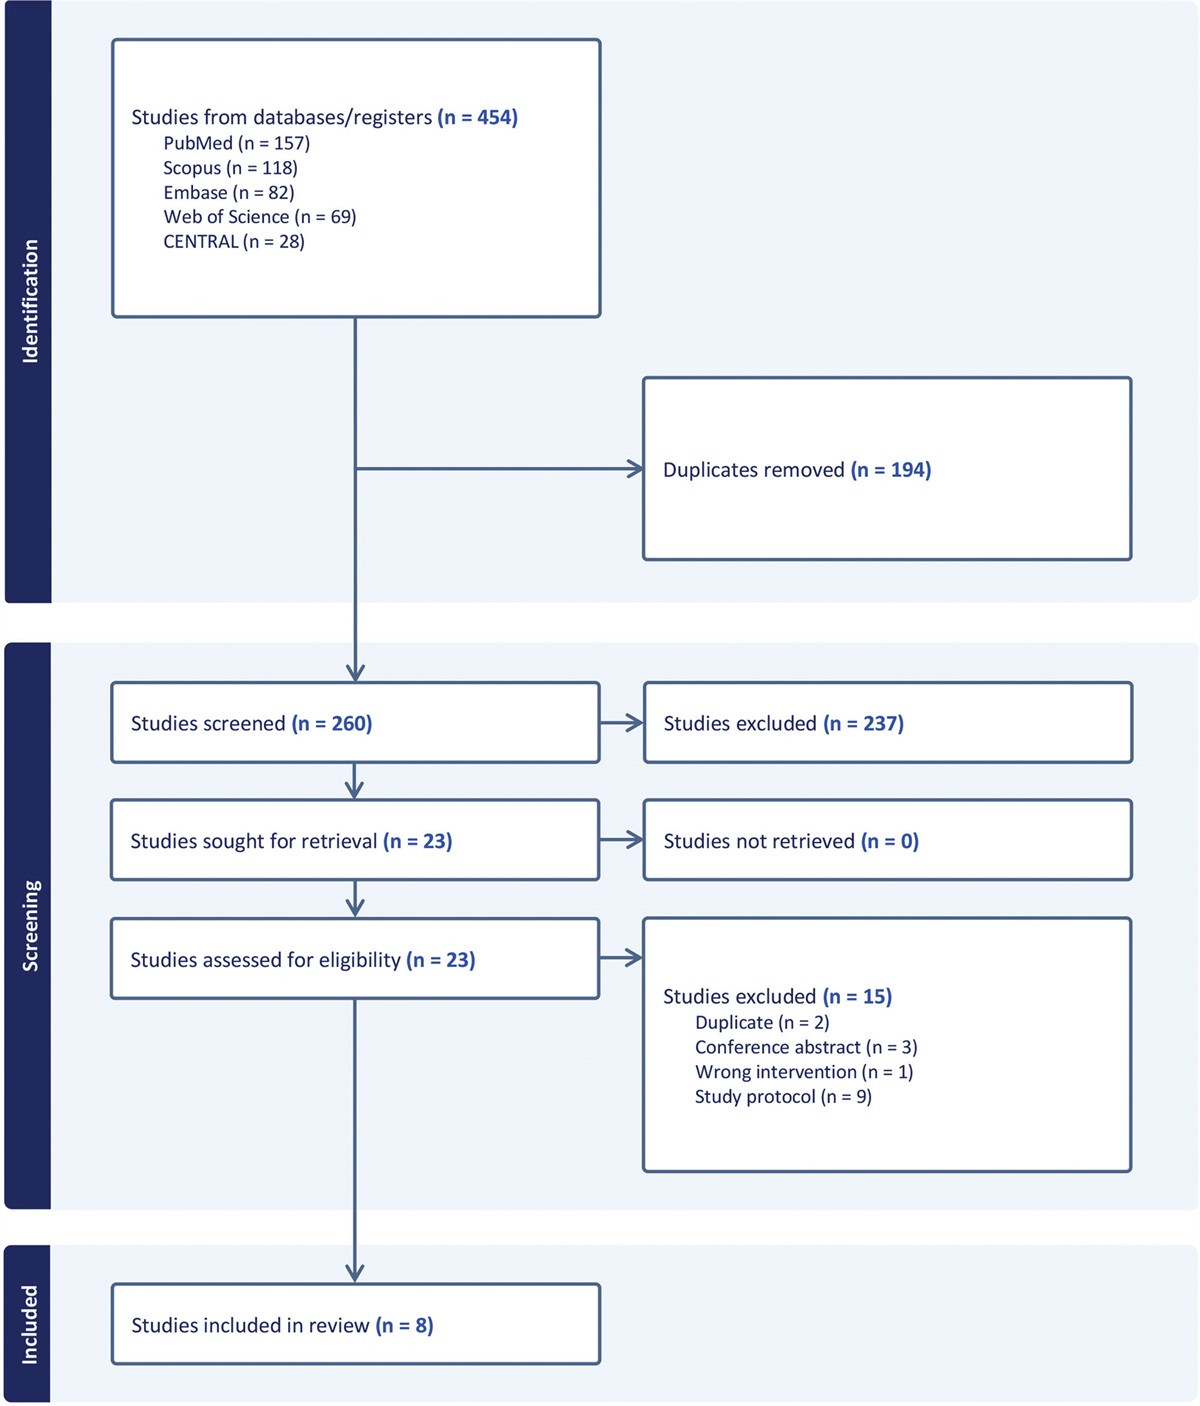 Intermittent fasting regimens for metabolic dysfunction-associated steatotic liver disease: a systematic review and network meta-analysis of randomized controlled trials